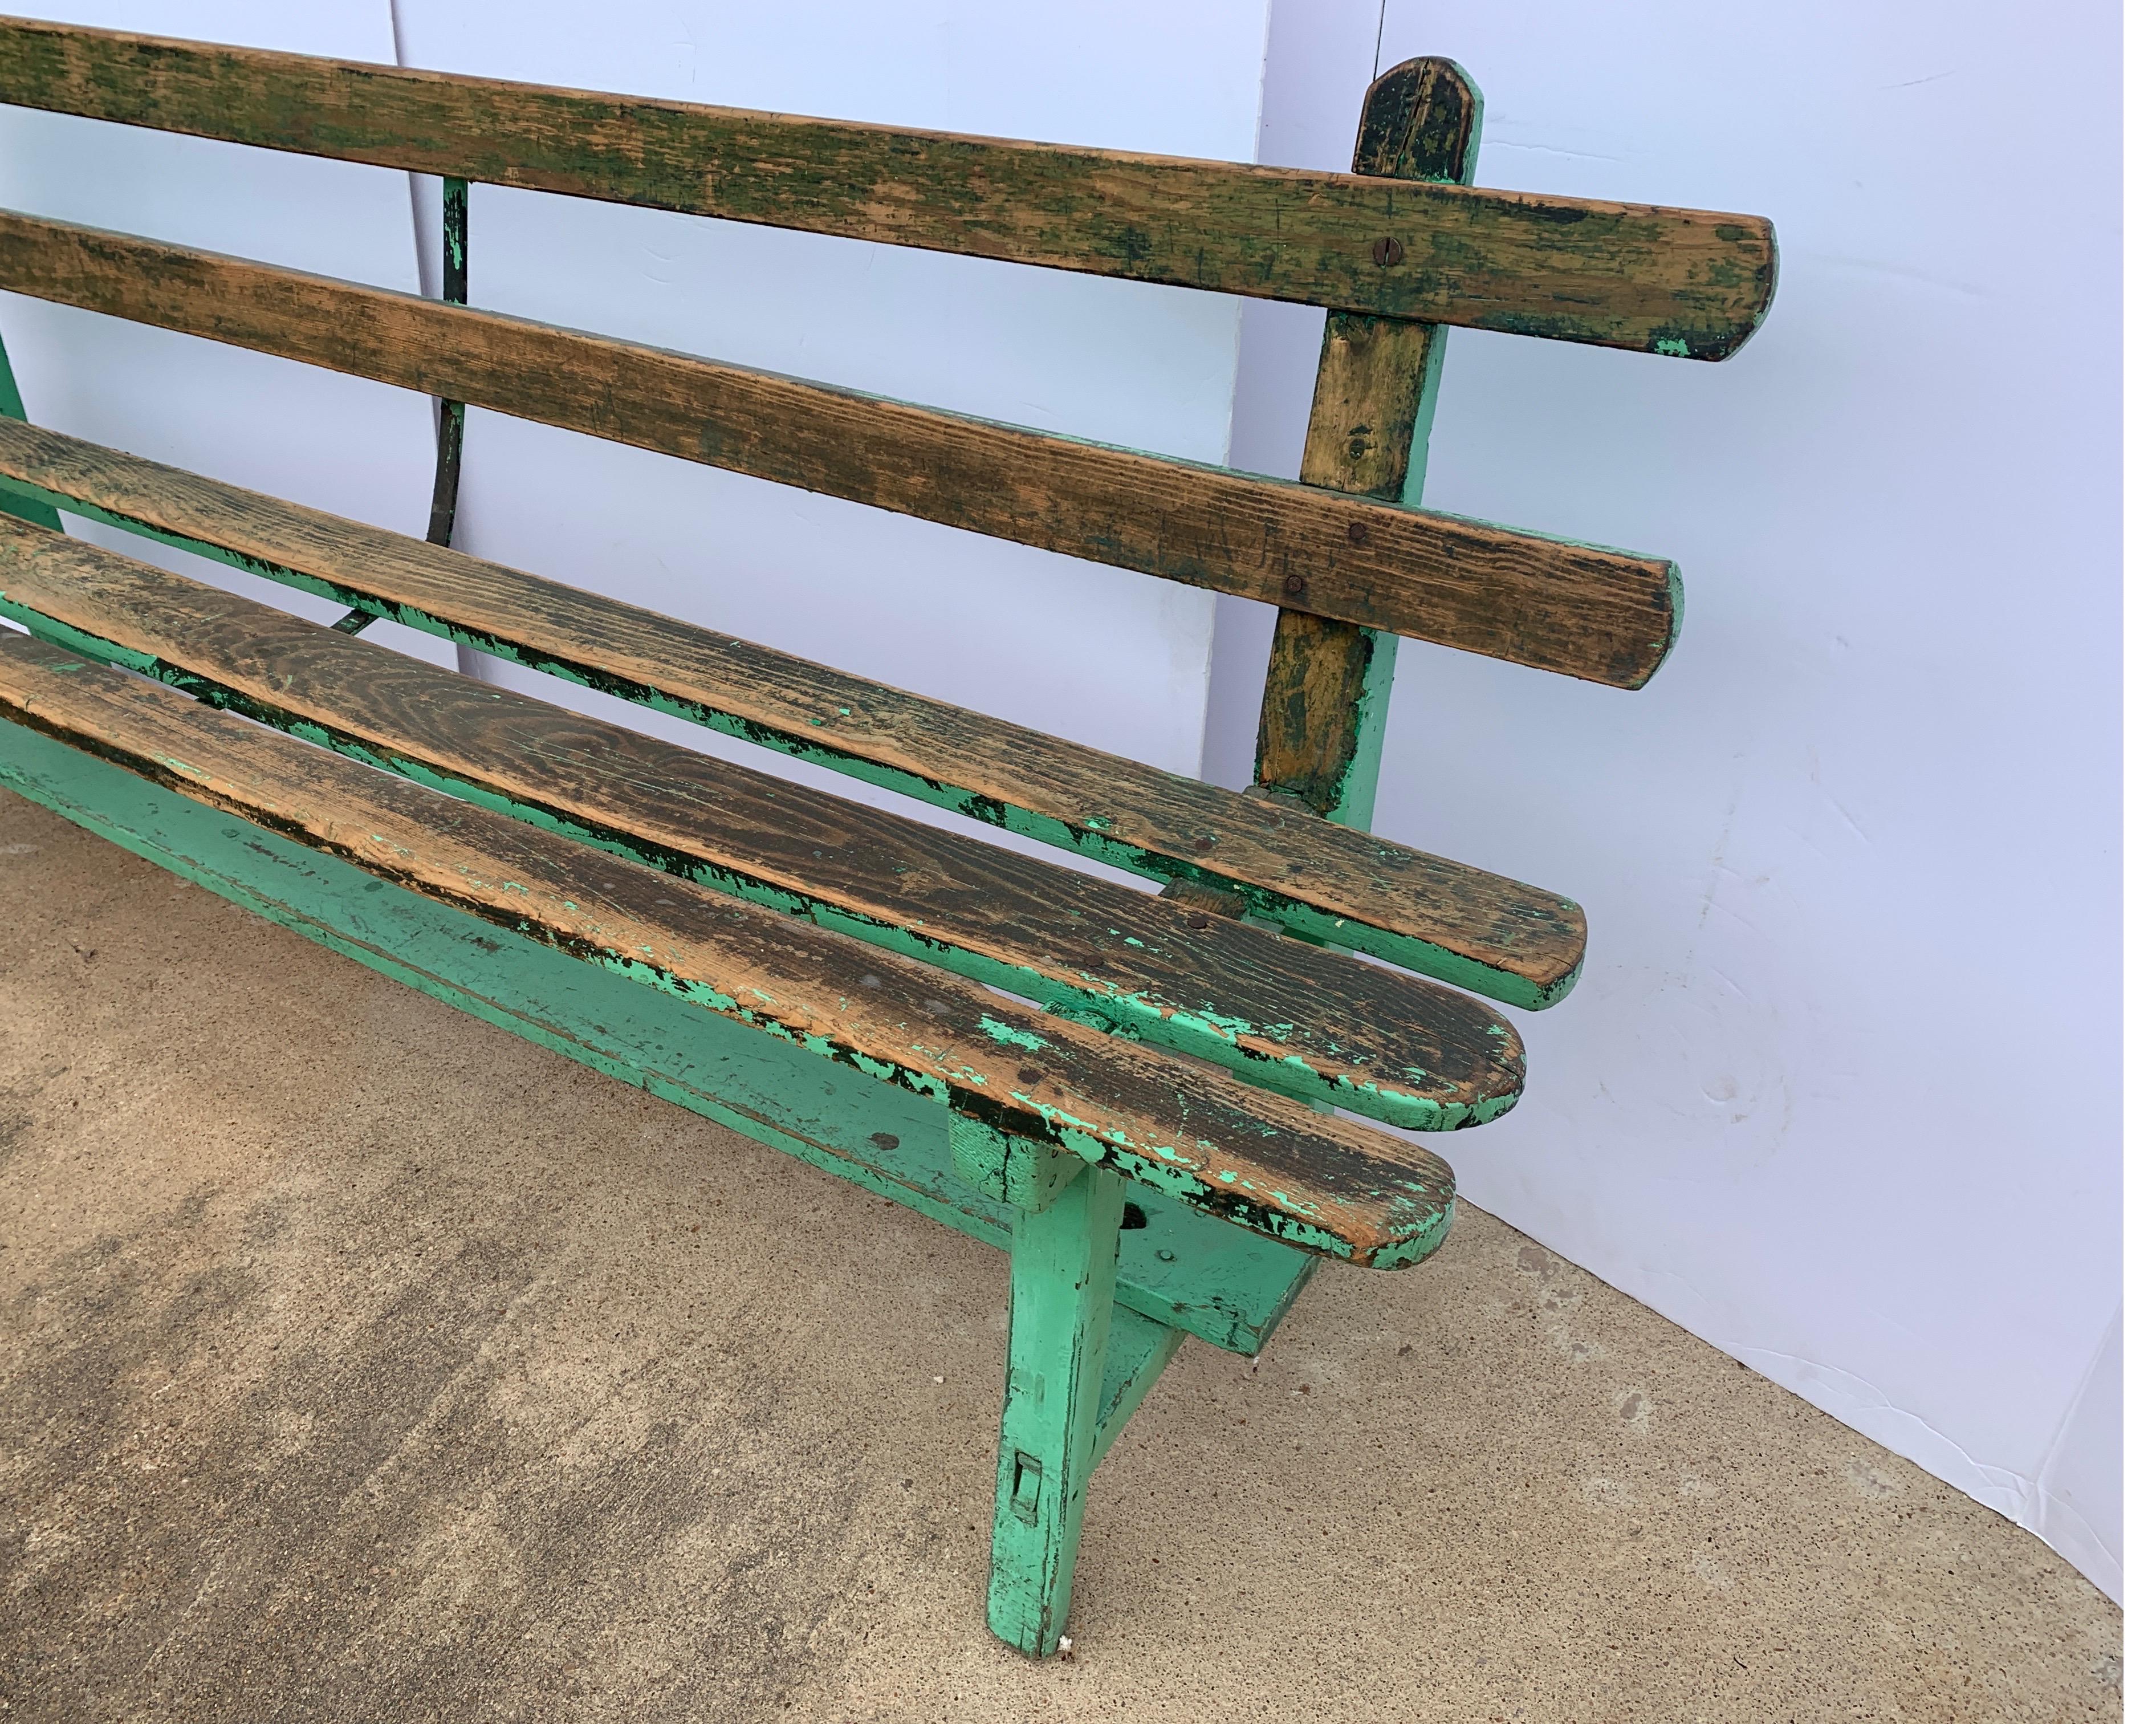 This bench is a great slat back garden bench from Spain with green paint remnants. It’s structurally sound and perfectly rustic.